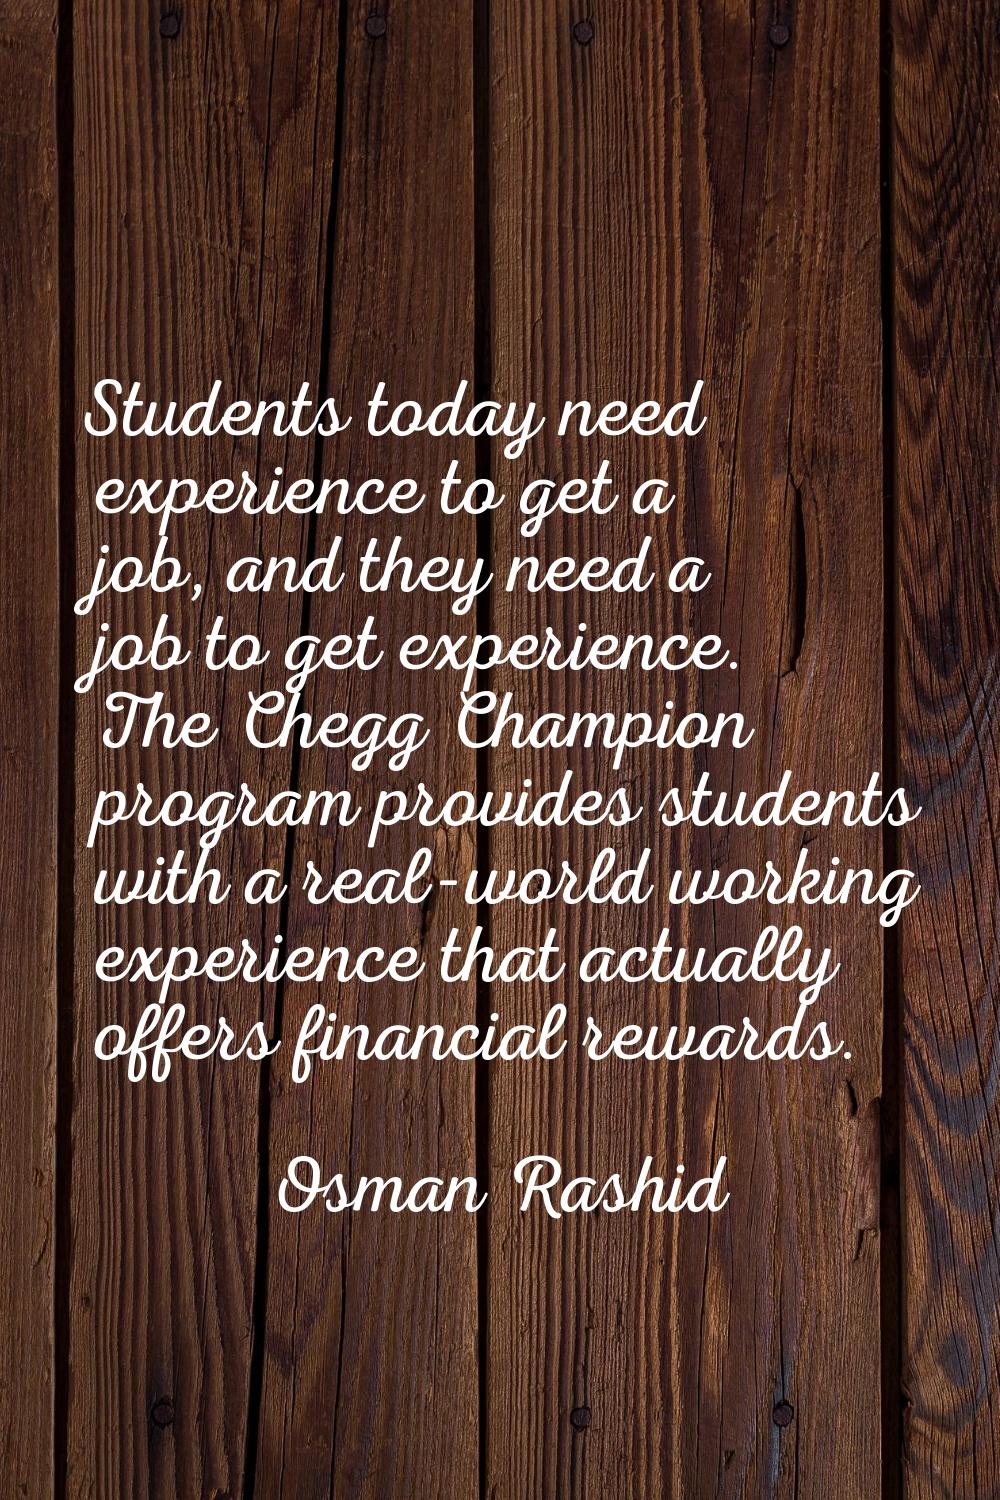 Students today need experience to get a job, and they need a job to get experience. The Chegg Champ